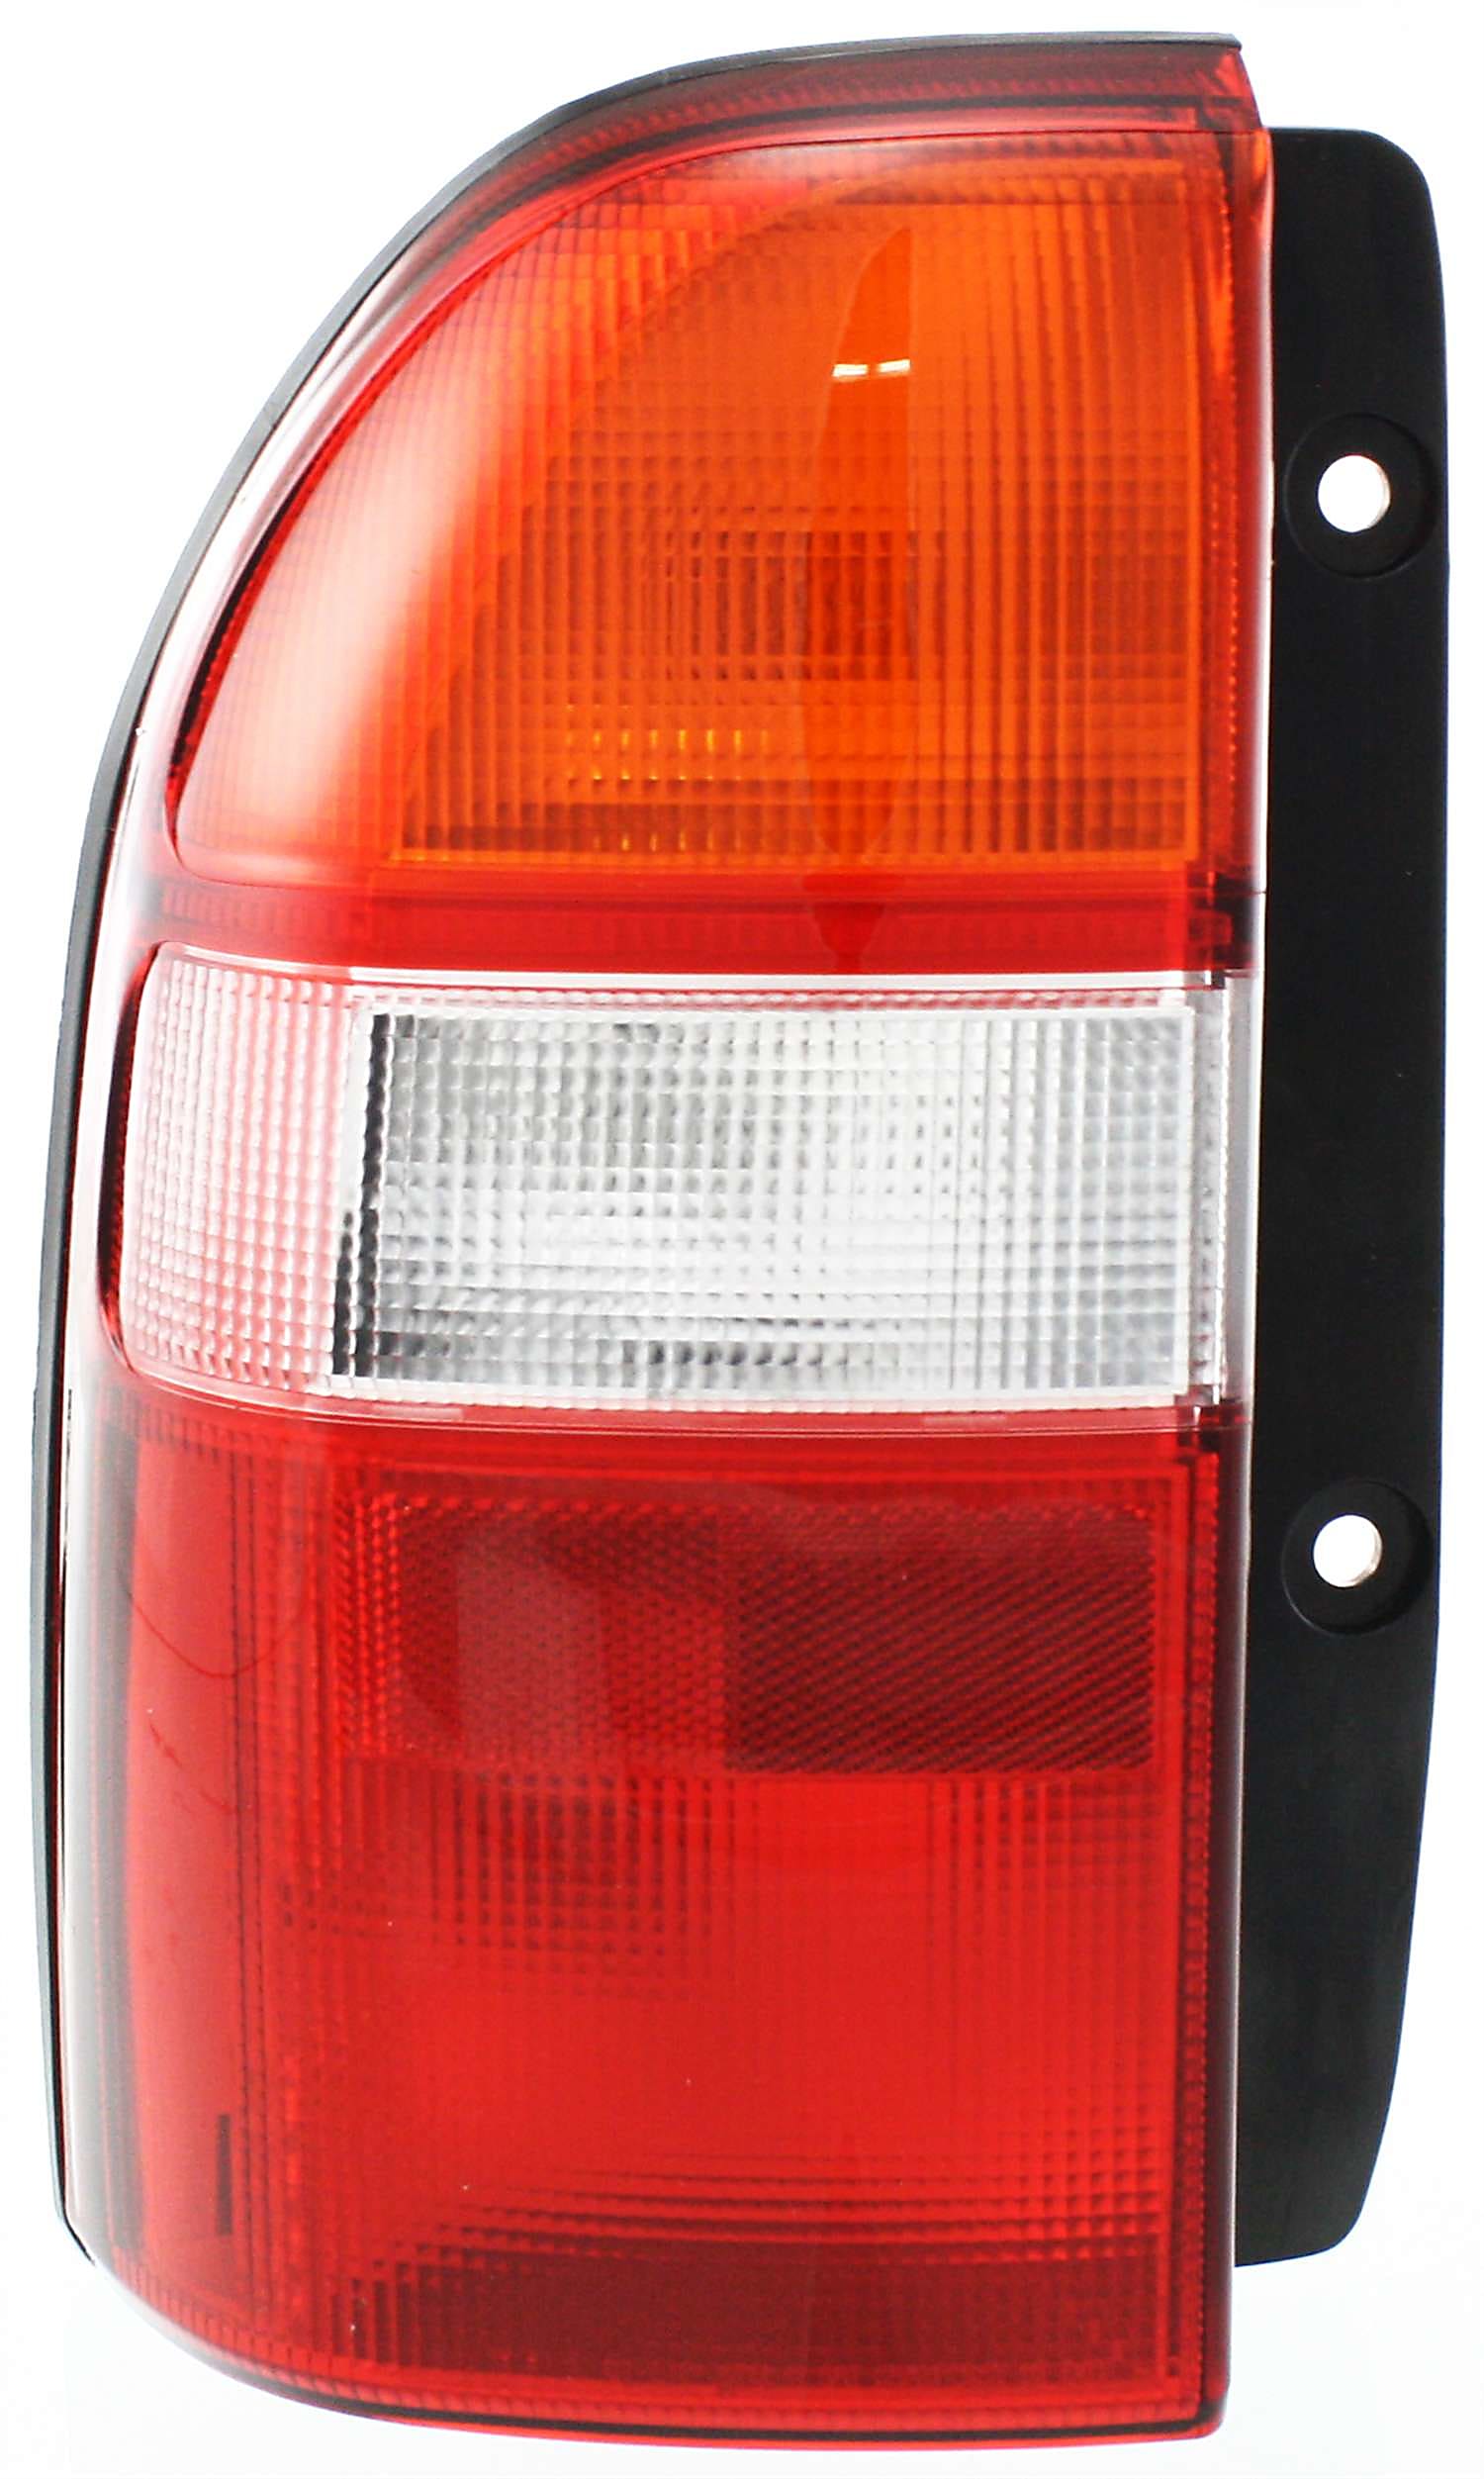 NEW LEFT SIDE TAIL LIGHT LENS AND HOUSING FOR 2005-2006 SUZUKI XL-7 SZ2818105 